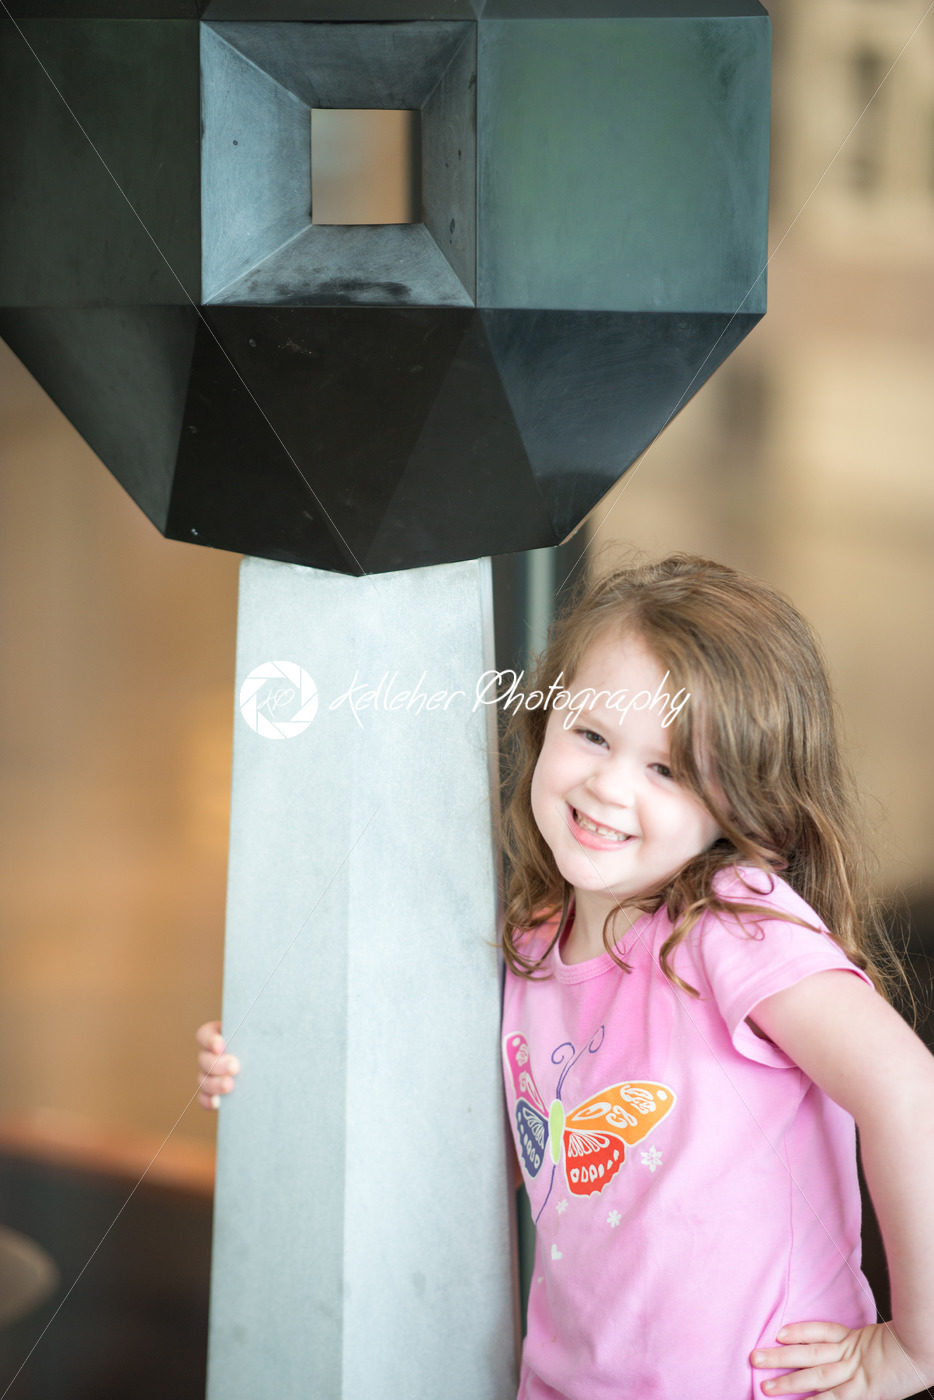 Pretty little girl with a happy sweet smile - Kelleher Photography Store